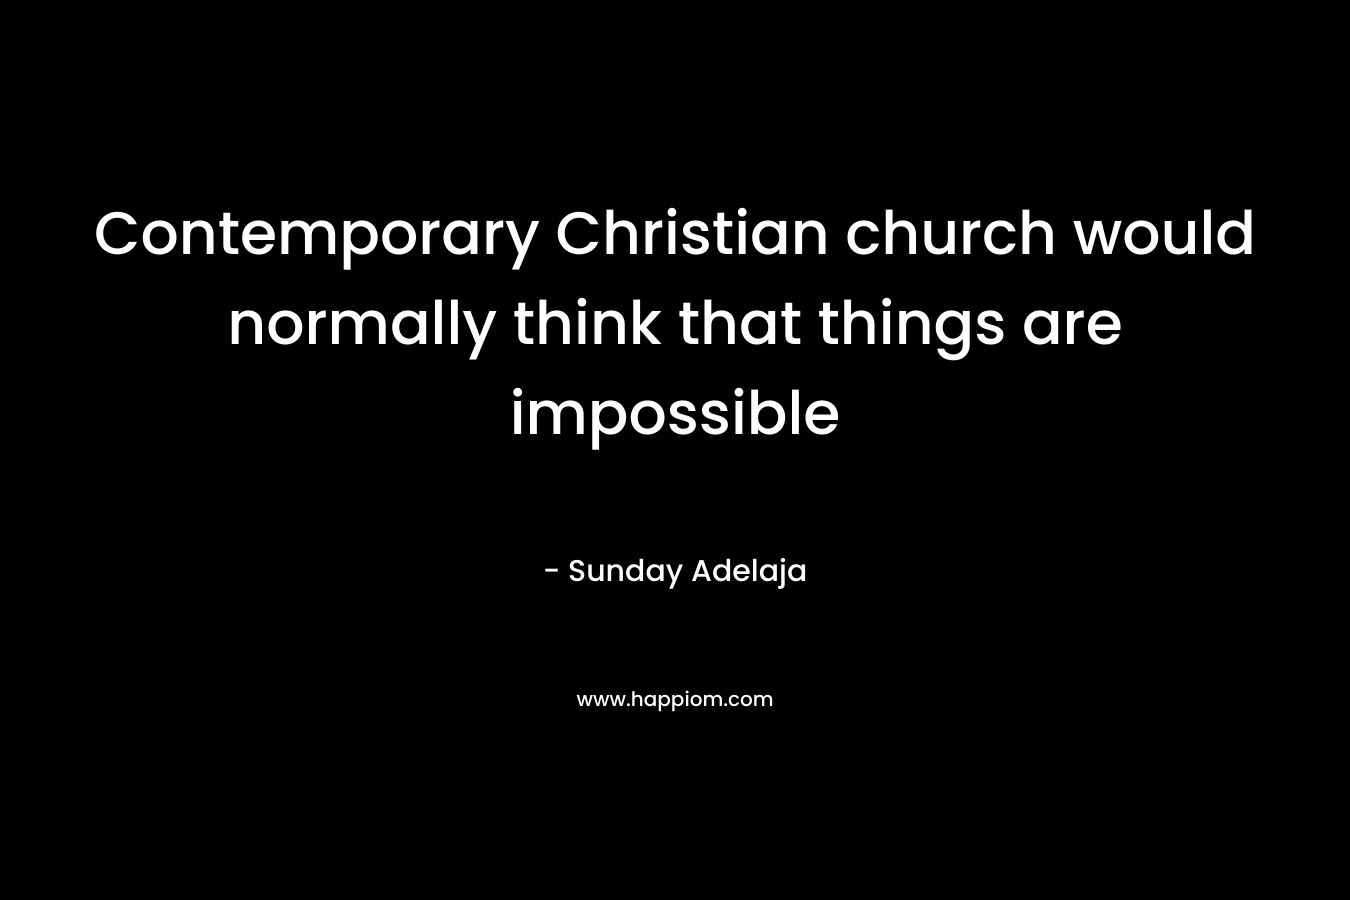 Contemporary Christian church would normally think that things are impossible